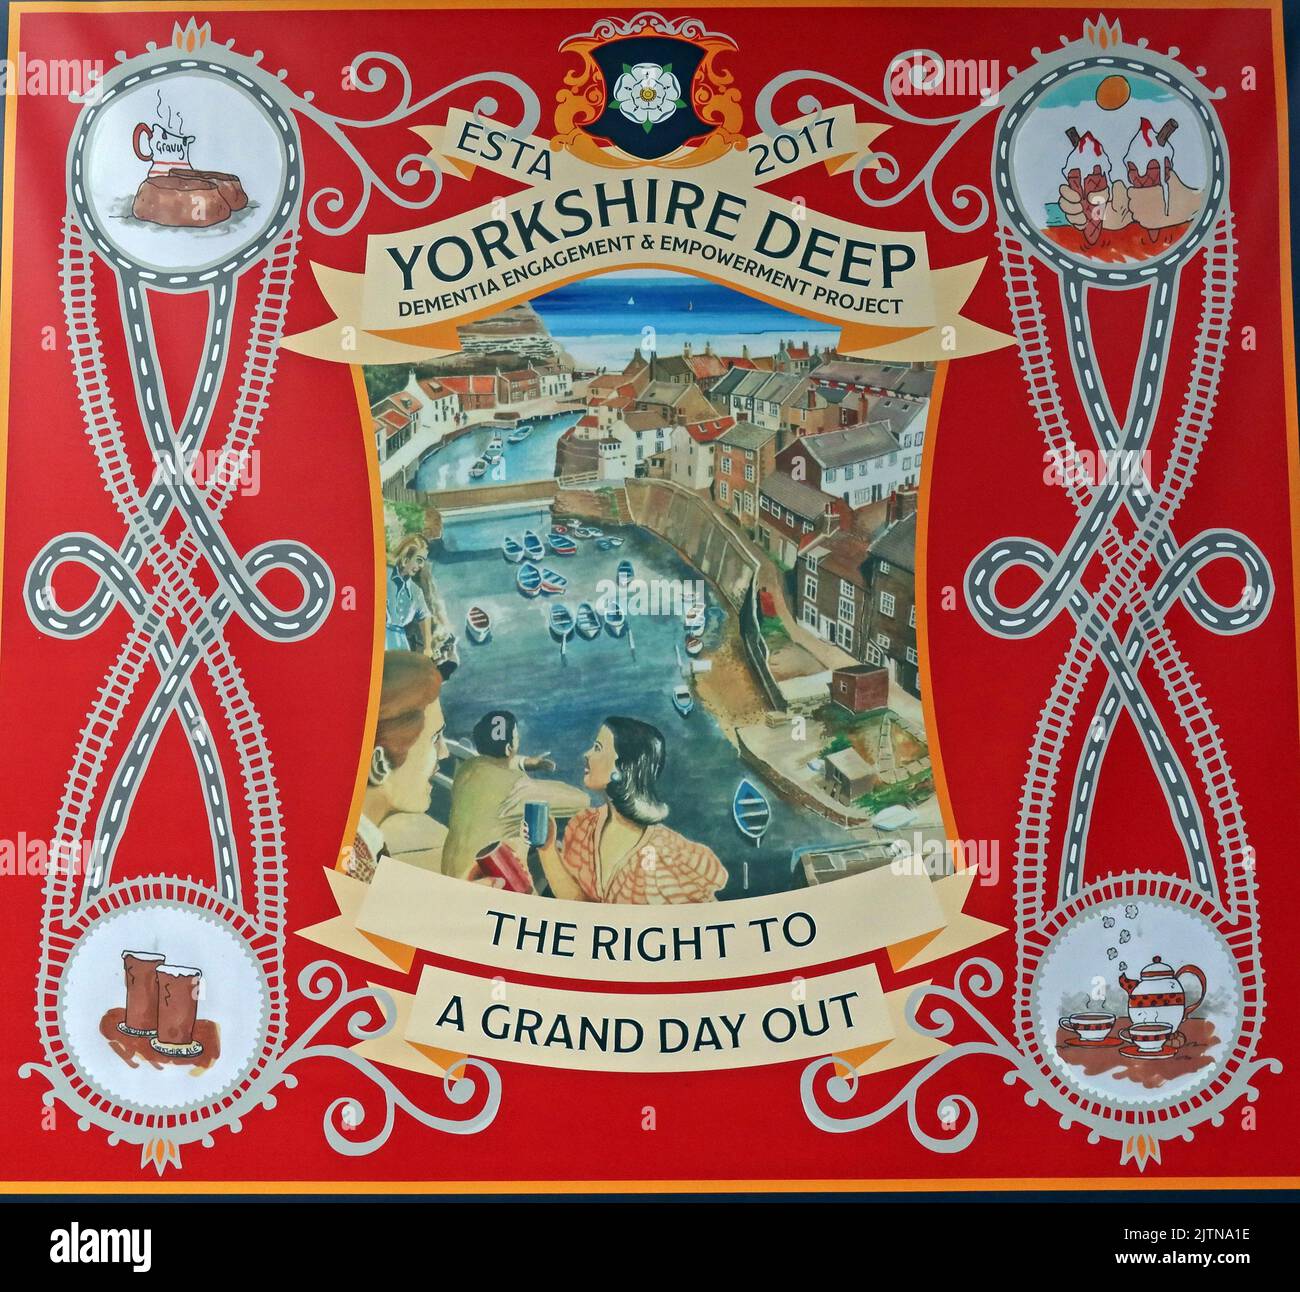 Banners for hope and change - Yorkshire Deep - The right to a grand day out - dementia Engagement & Empowerment Project - Esta 2017 Stock Photo